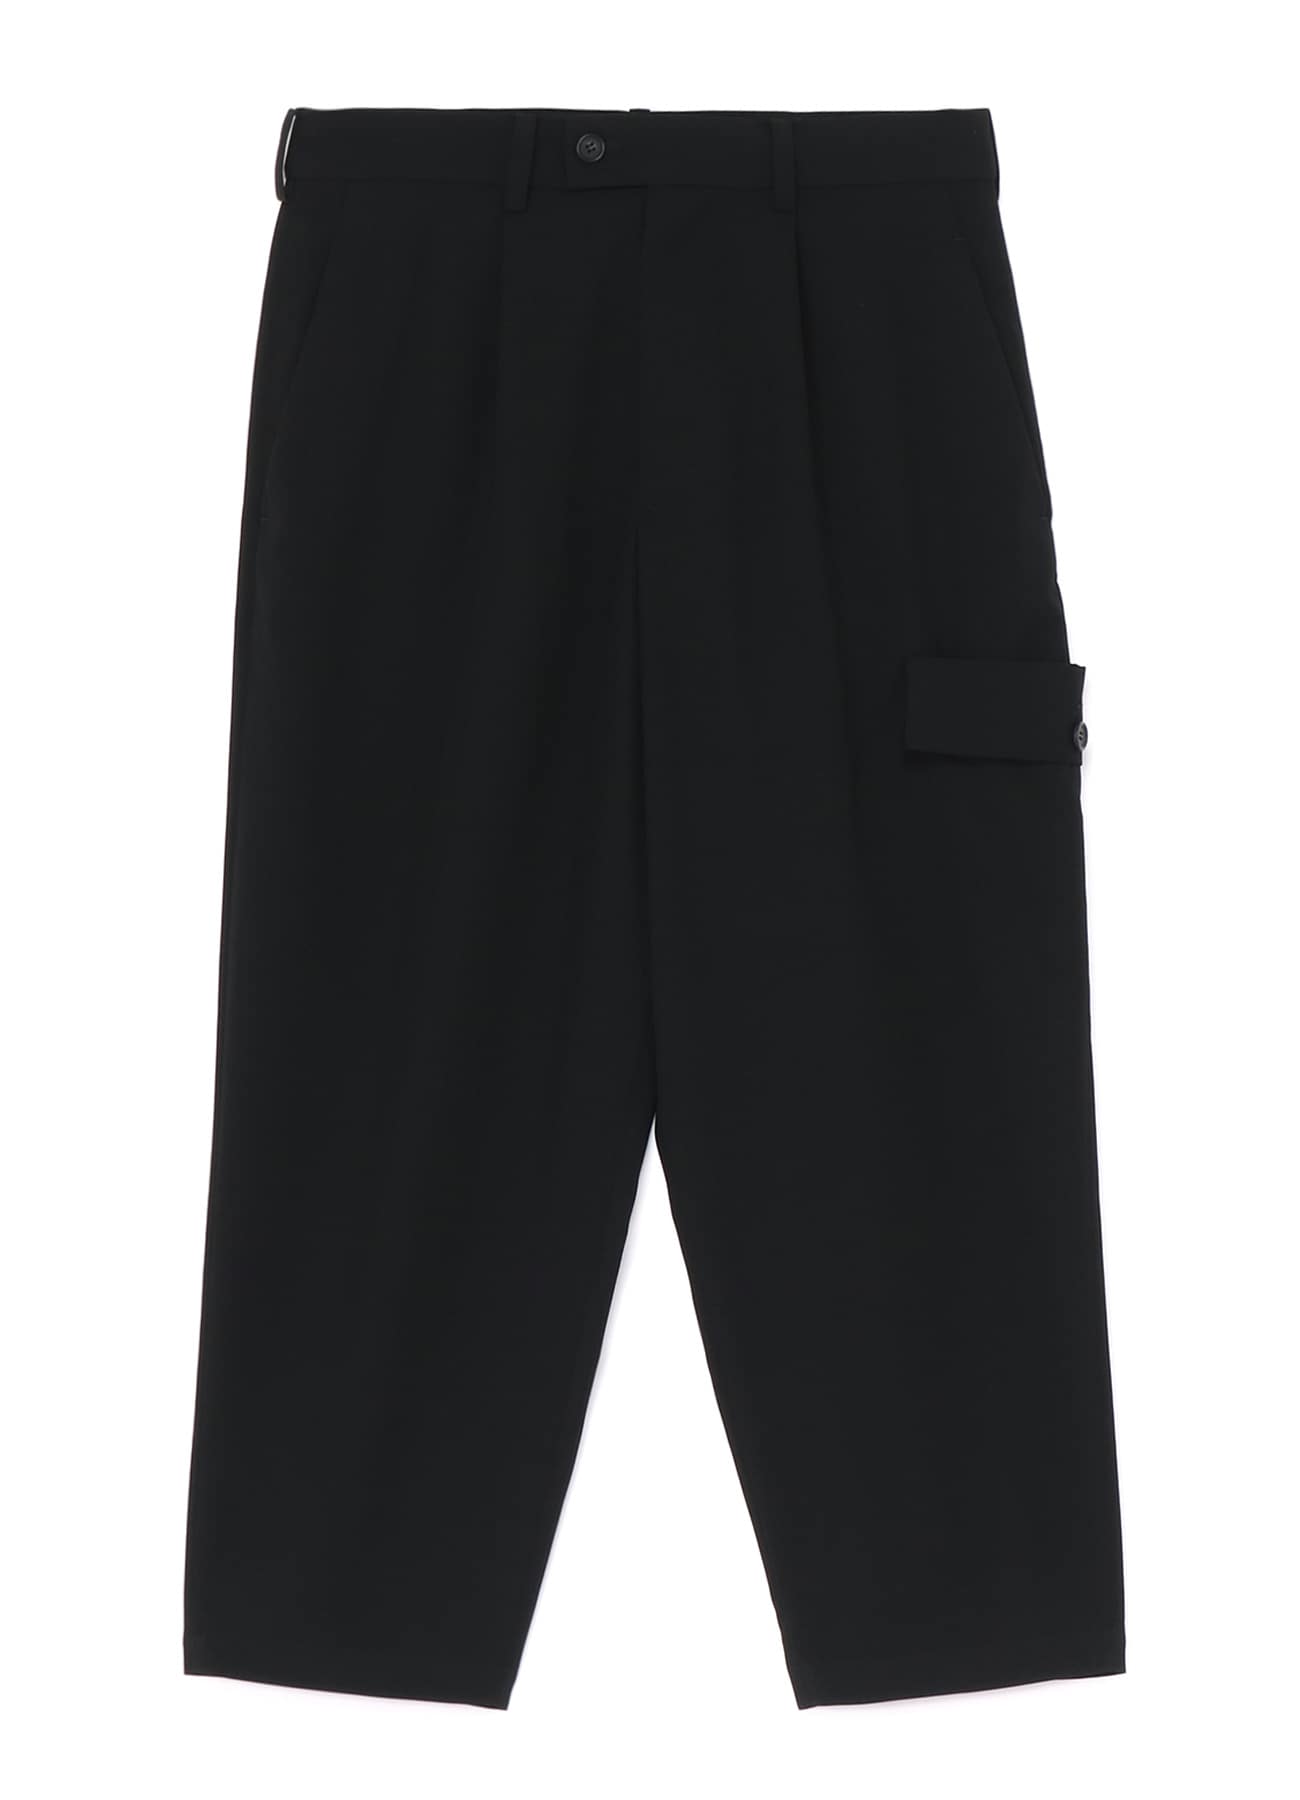 POLYESTER GABARDINE PANTS WITH KNEE FLAP POCKETS(M Black): S'YTE 